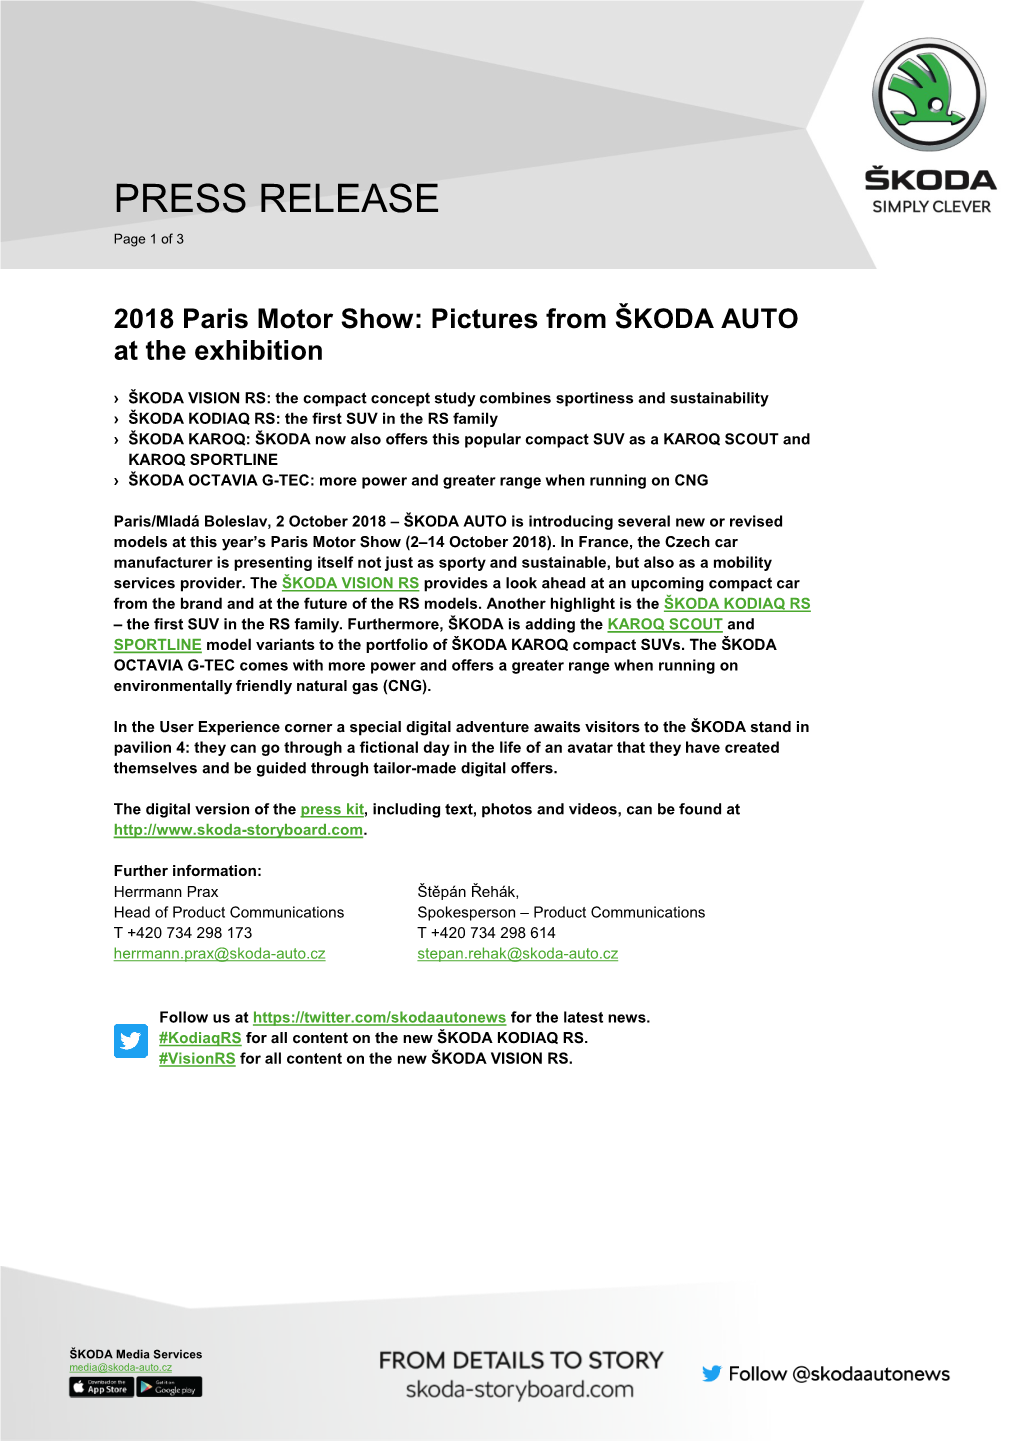 2018 Paris Motor Show: Pictures from ŠKODA AUTO at the Exhibition